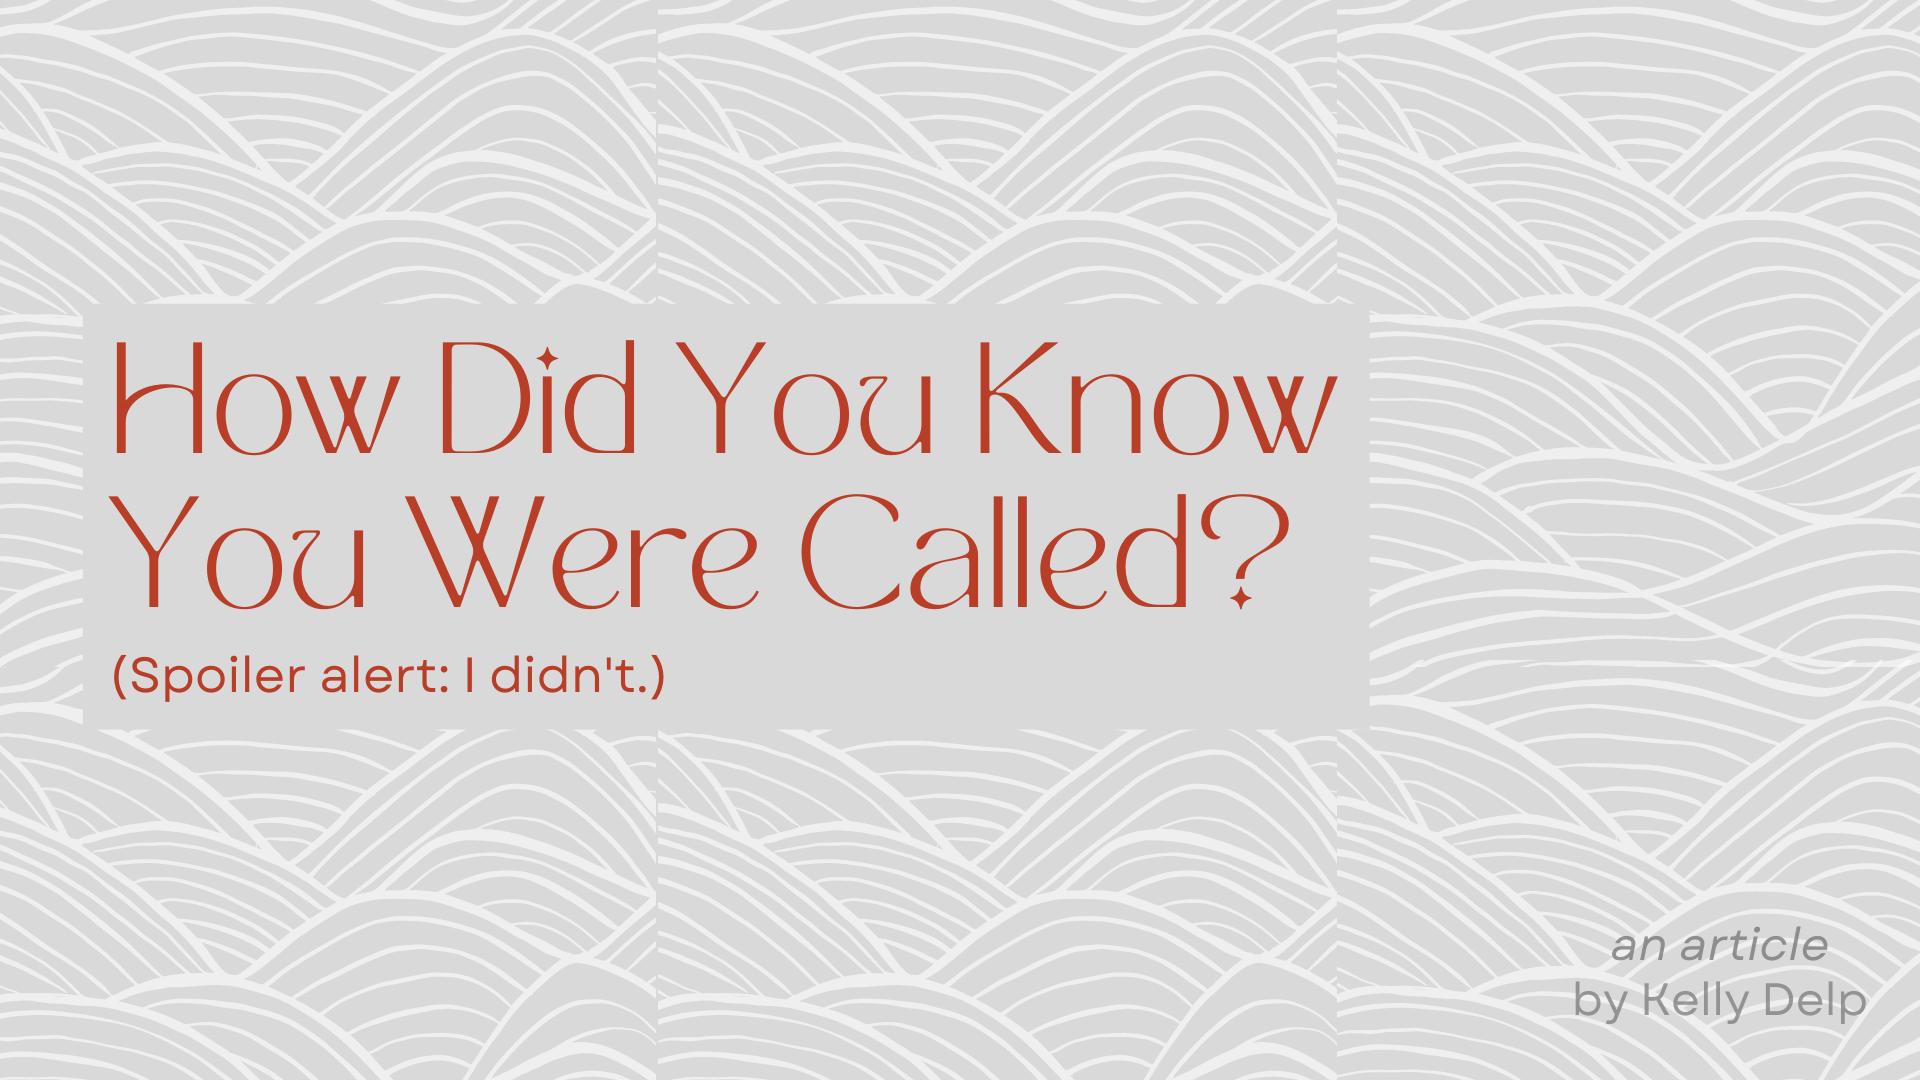 How Did You Know You Were Called?